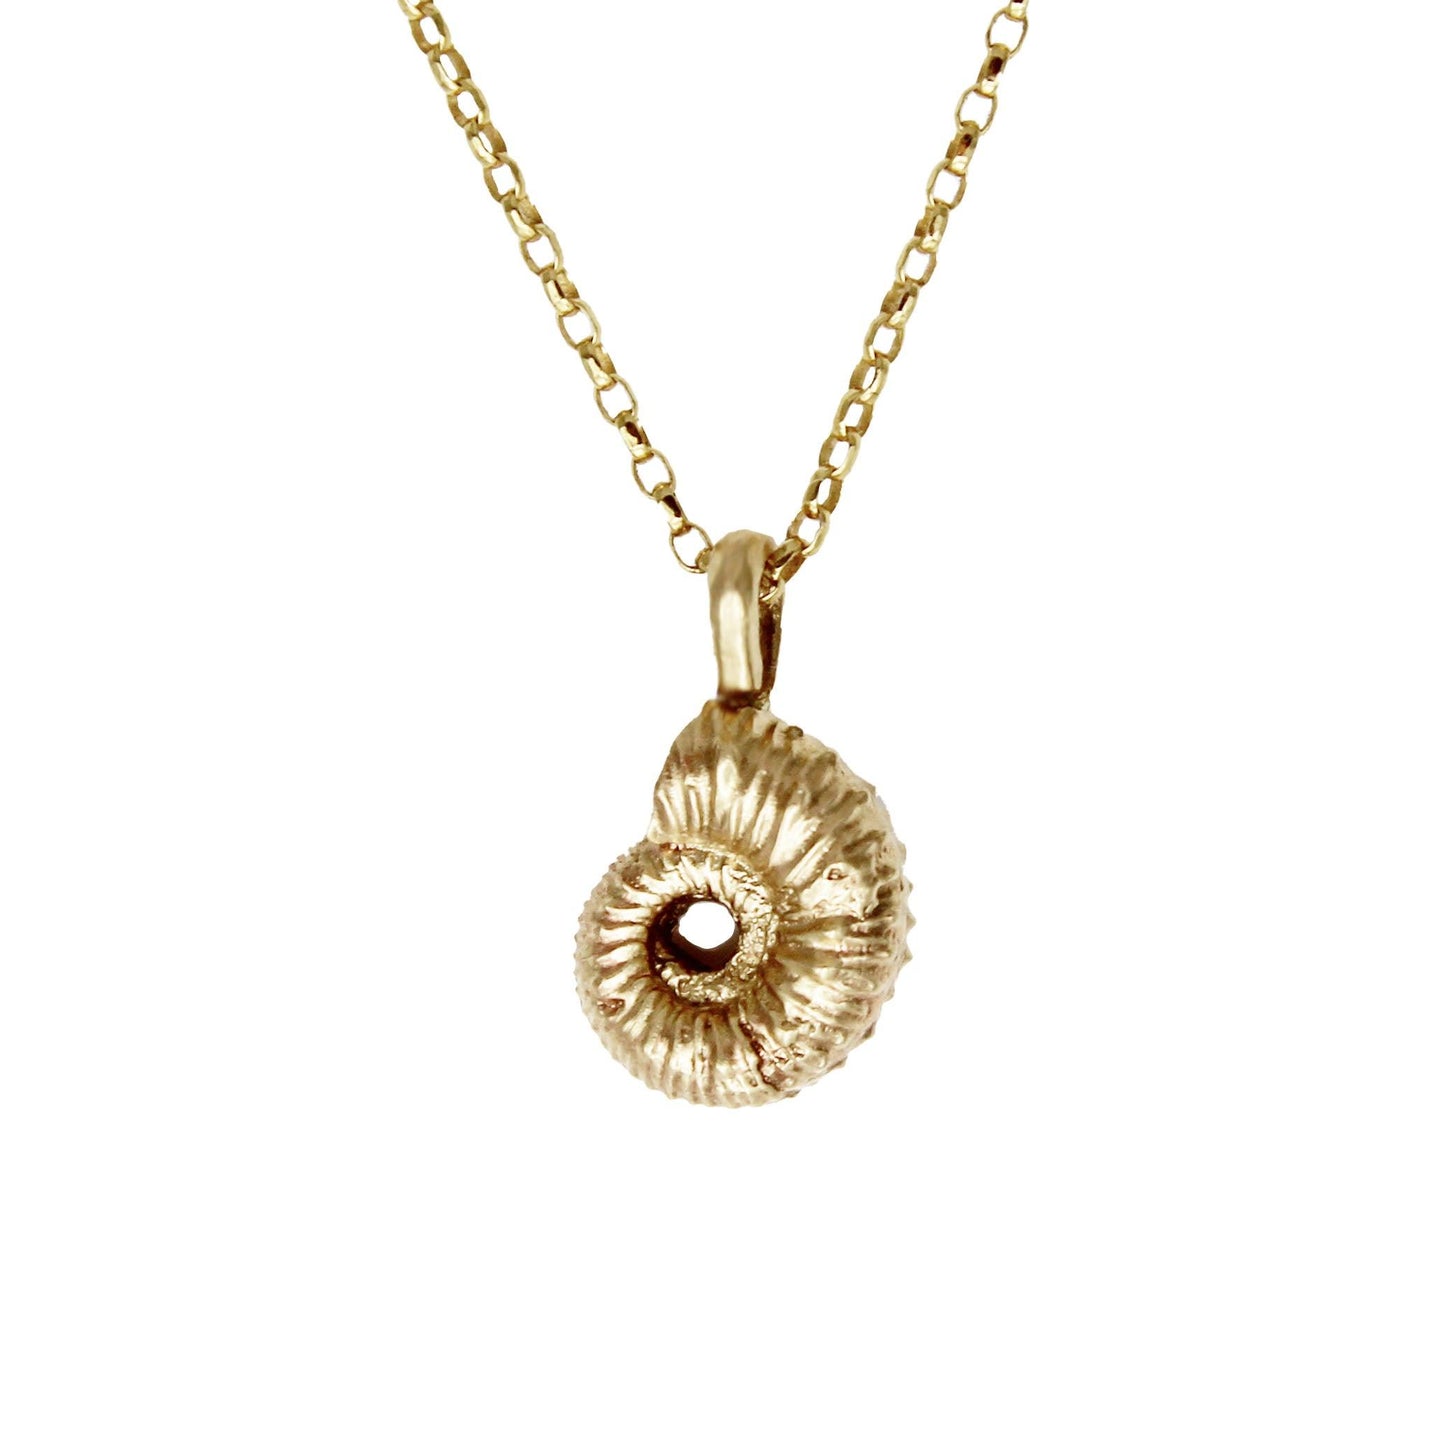 Ammonite Necklace - Solid Gold